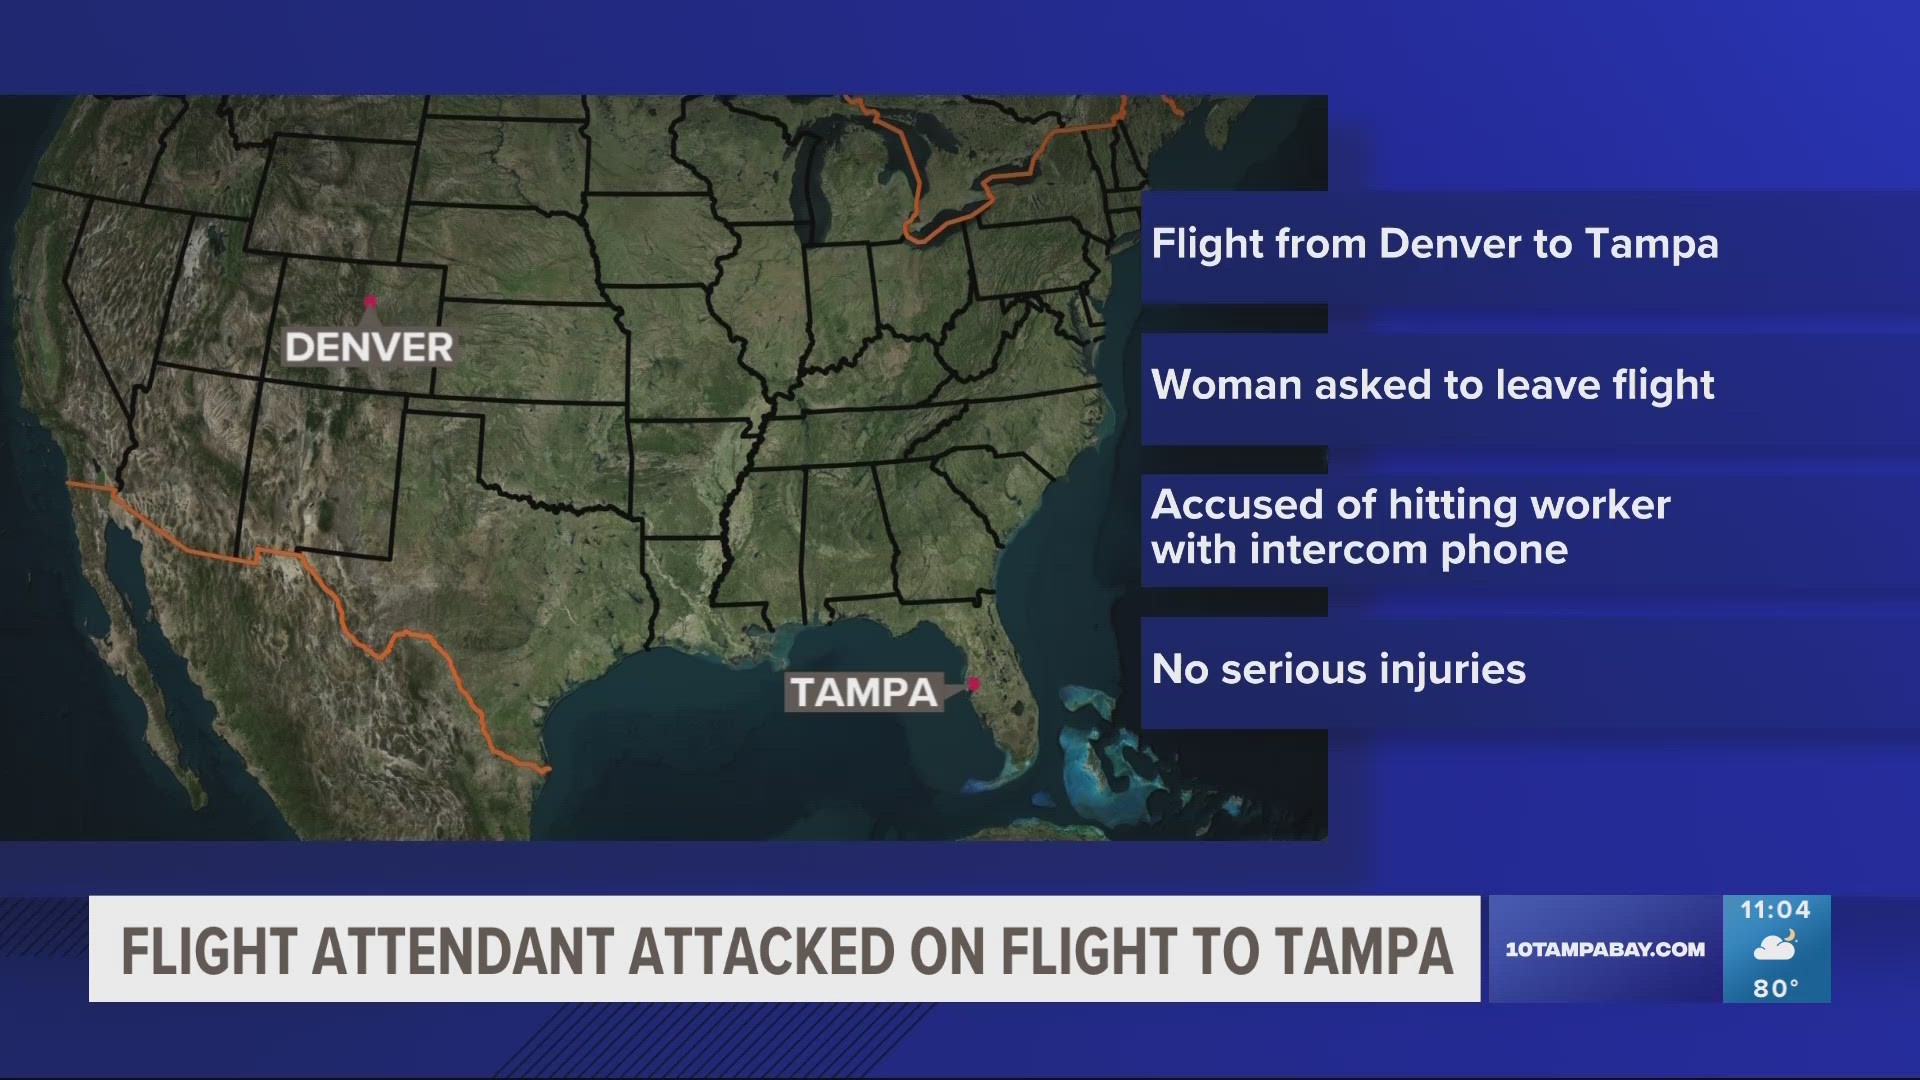 Frontier Airlines says the flight was able to depart for Tampa at around 5:30 a.m. Sunday.